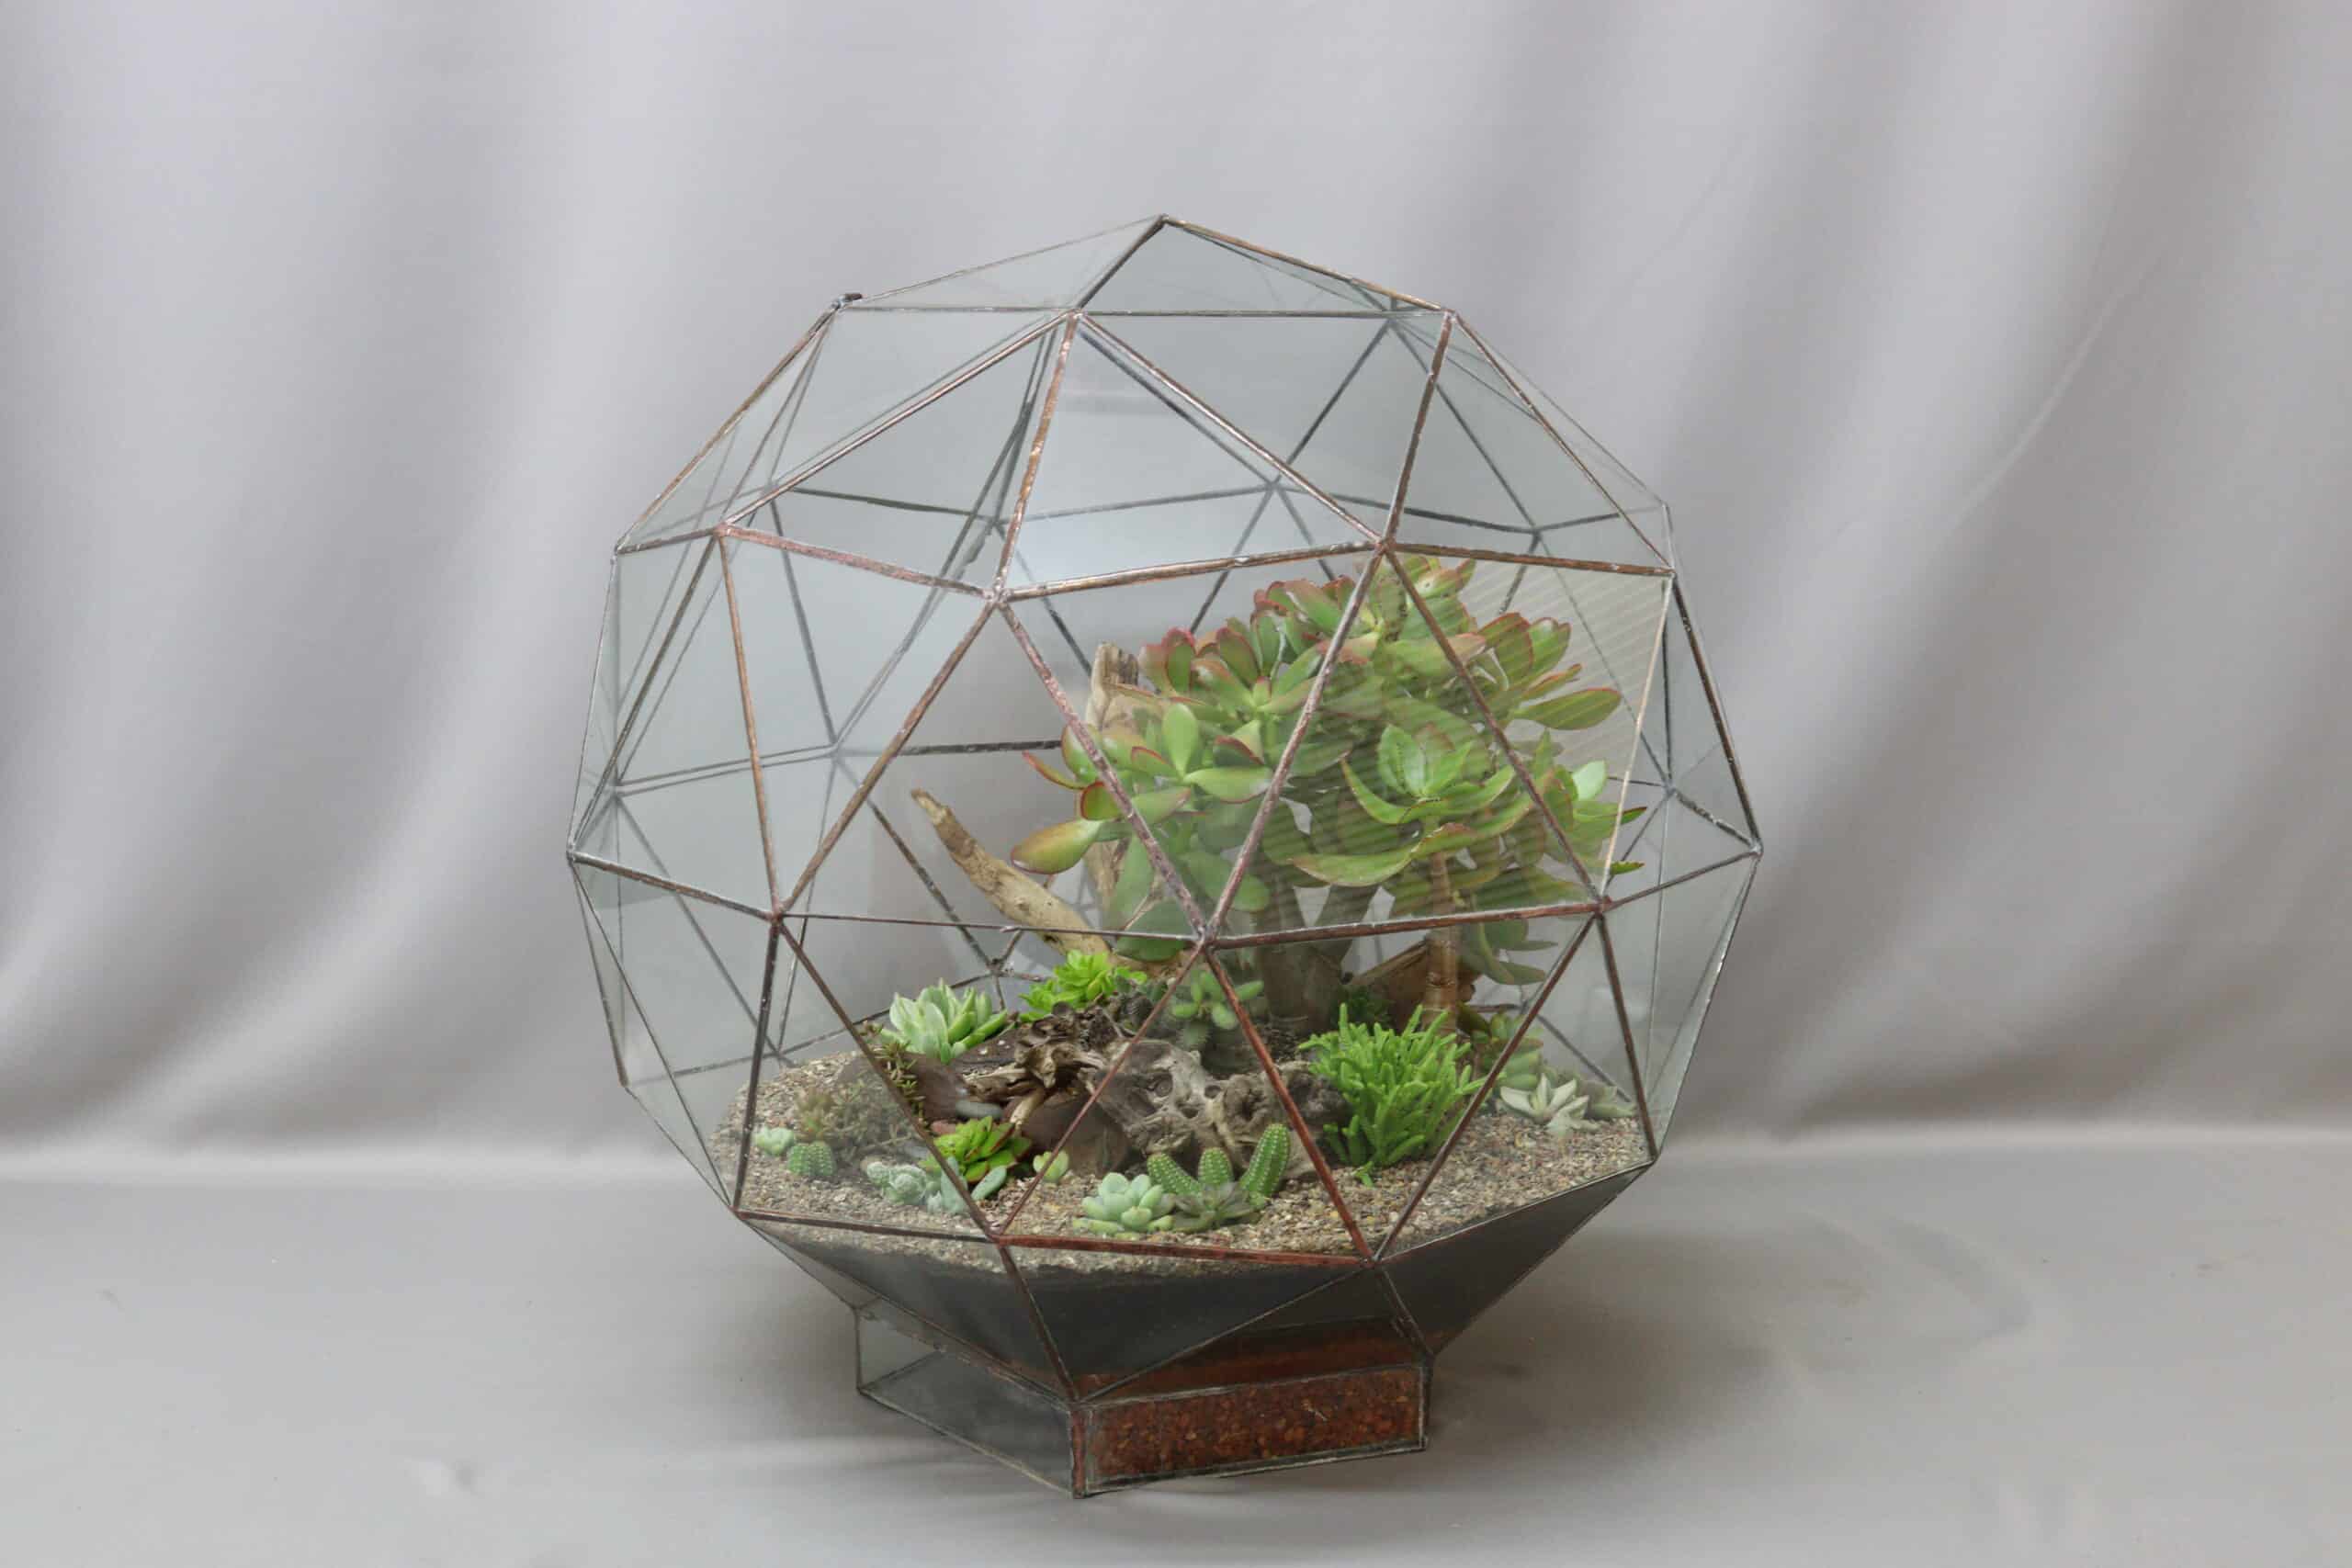 A large geometric-inspired glass terrarium planter with an assortment of succulents inside, against a plain grey background.